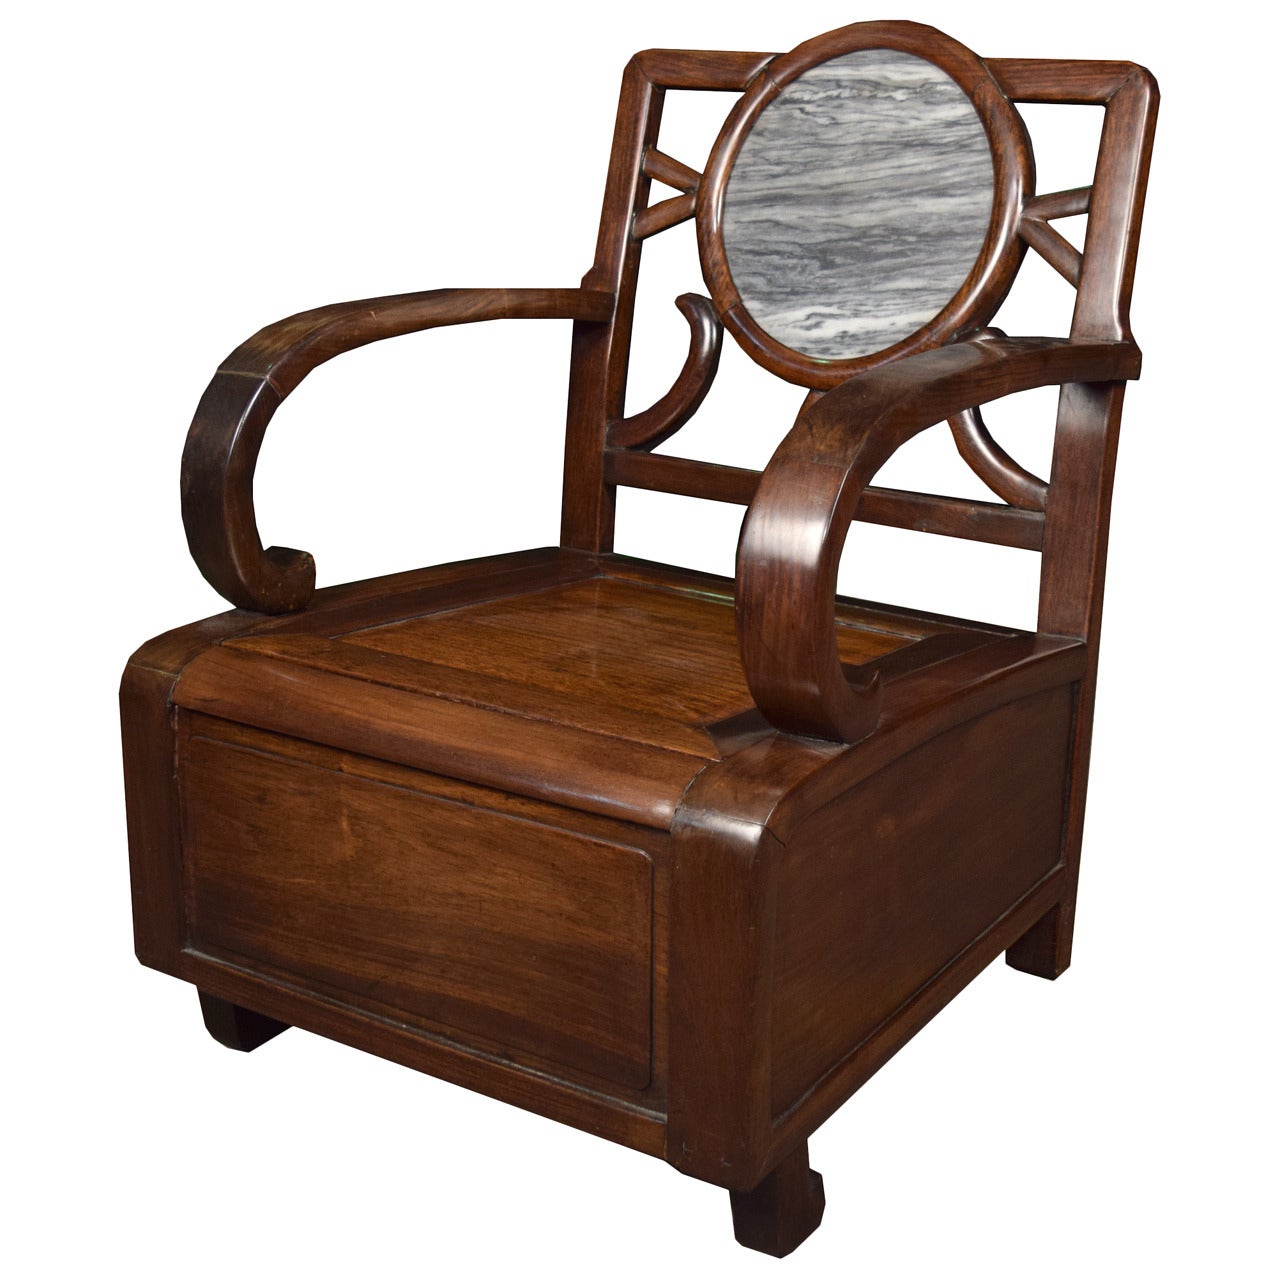 Chinese Deco Meditation Chair with Stone Medallion